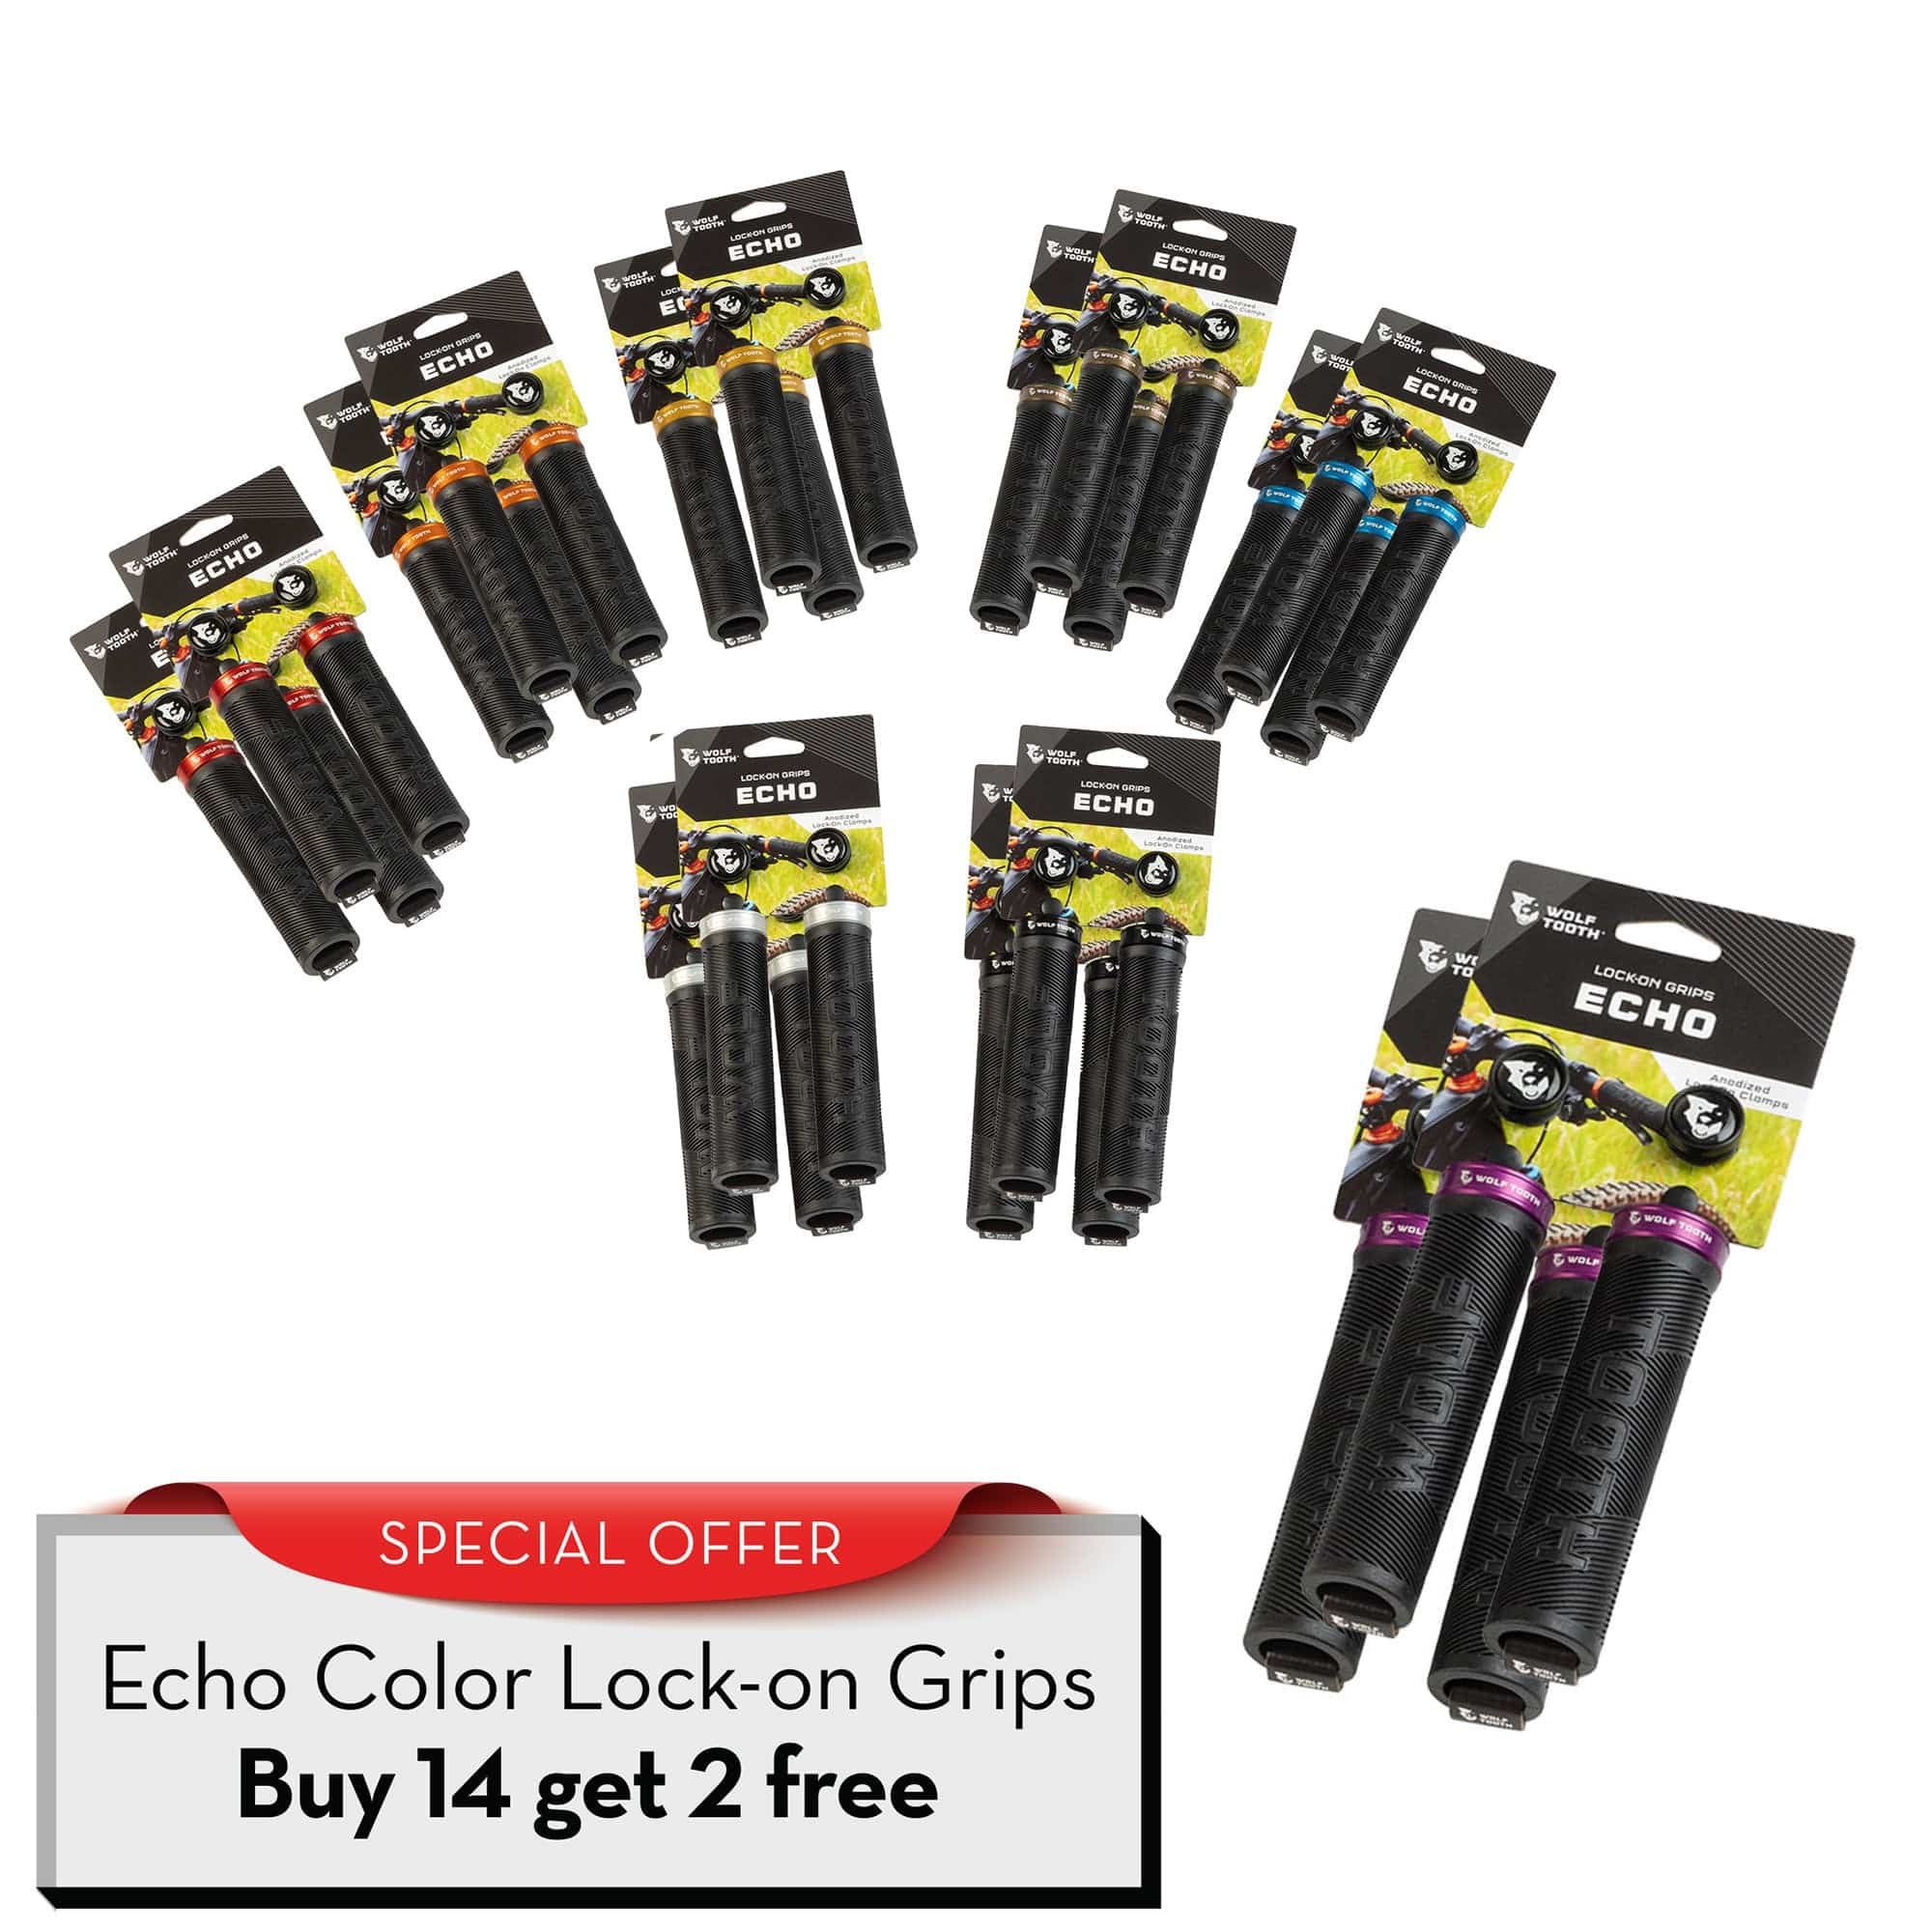 Echo Lock-On Grip Bundle - Buy 14 sets and get 2 sets for Free